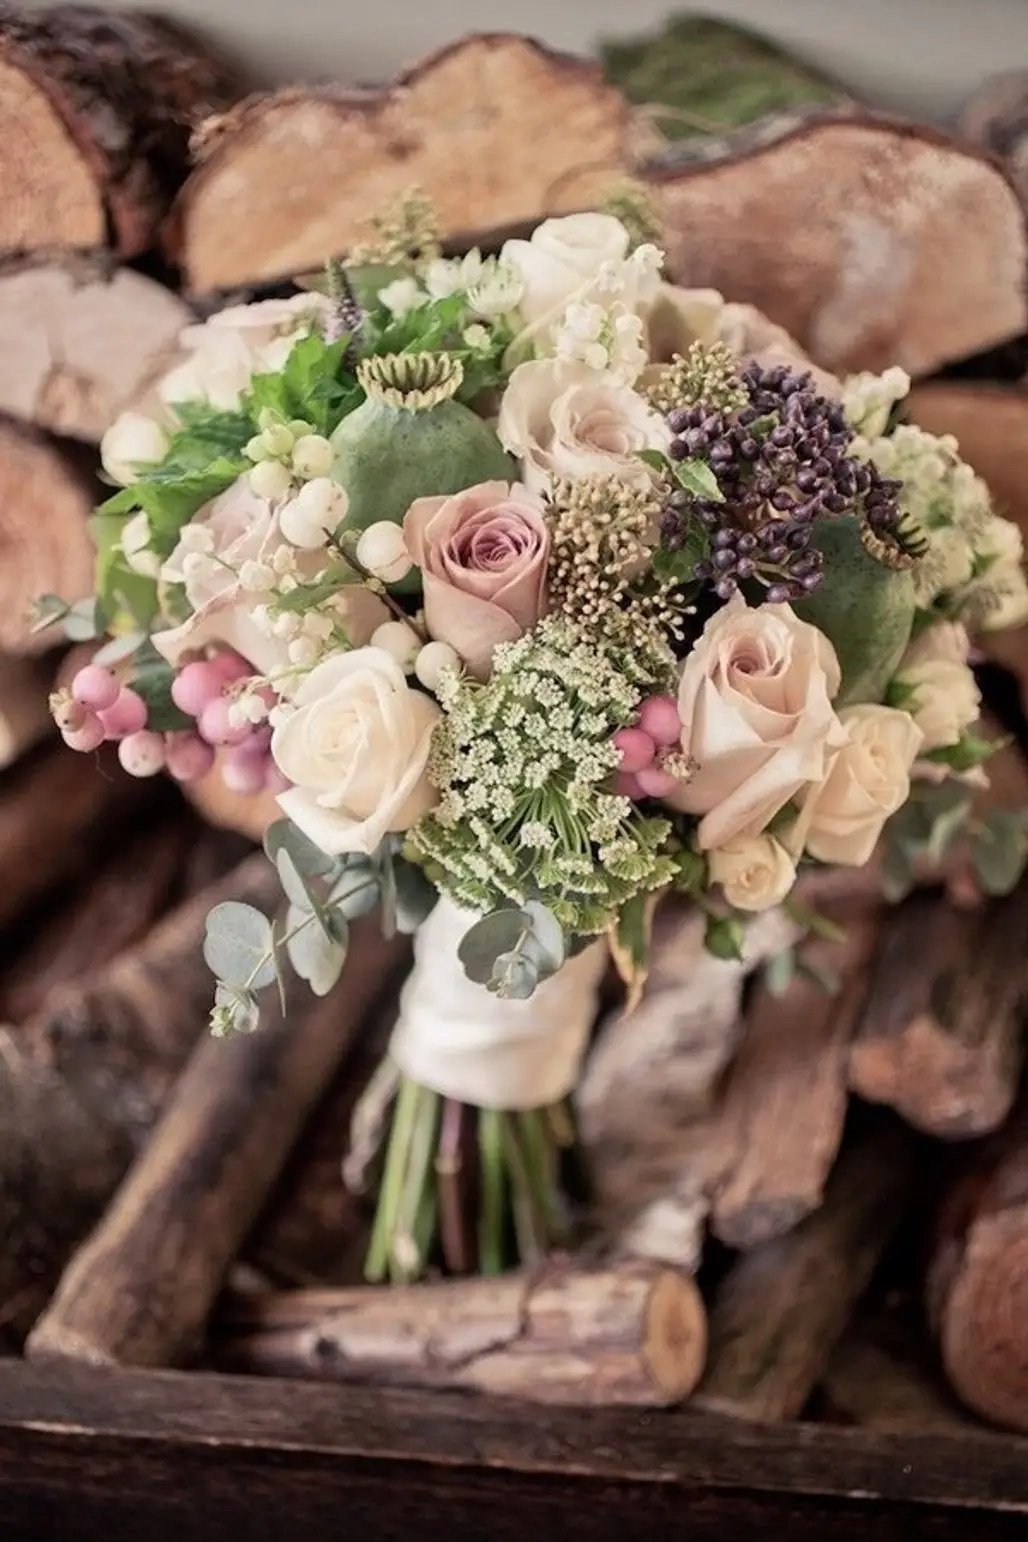 Vintage Roses with Hydrangea, Poppy Seed Heads, Astrantia, Snowberry and Herbs